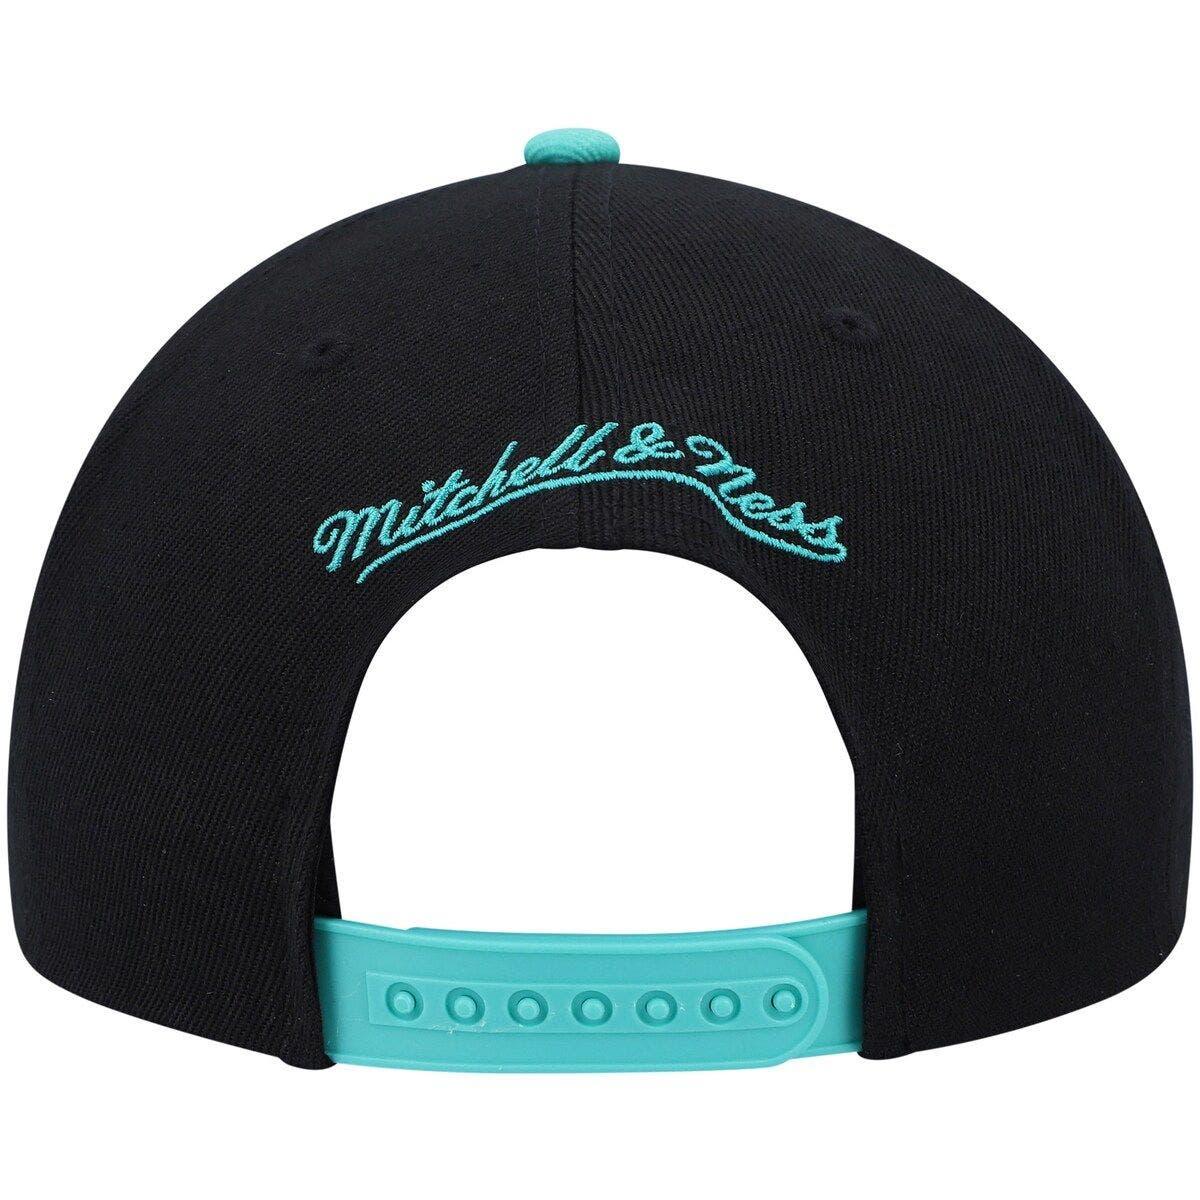 Vancouver Grizzlies Mitchell & Ness Hardwood Classics Team Two-Tone 2.0  Snapback Hat - Turquoise/Black